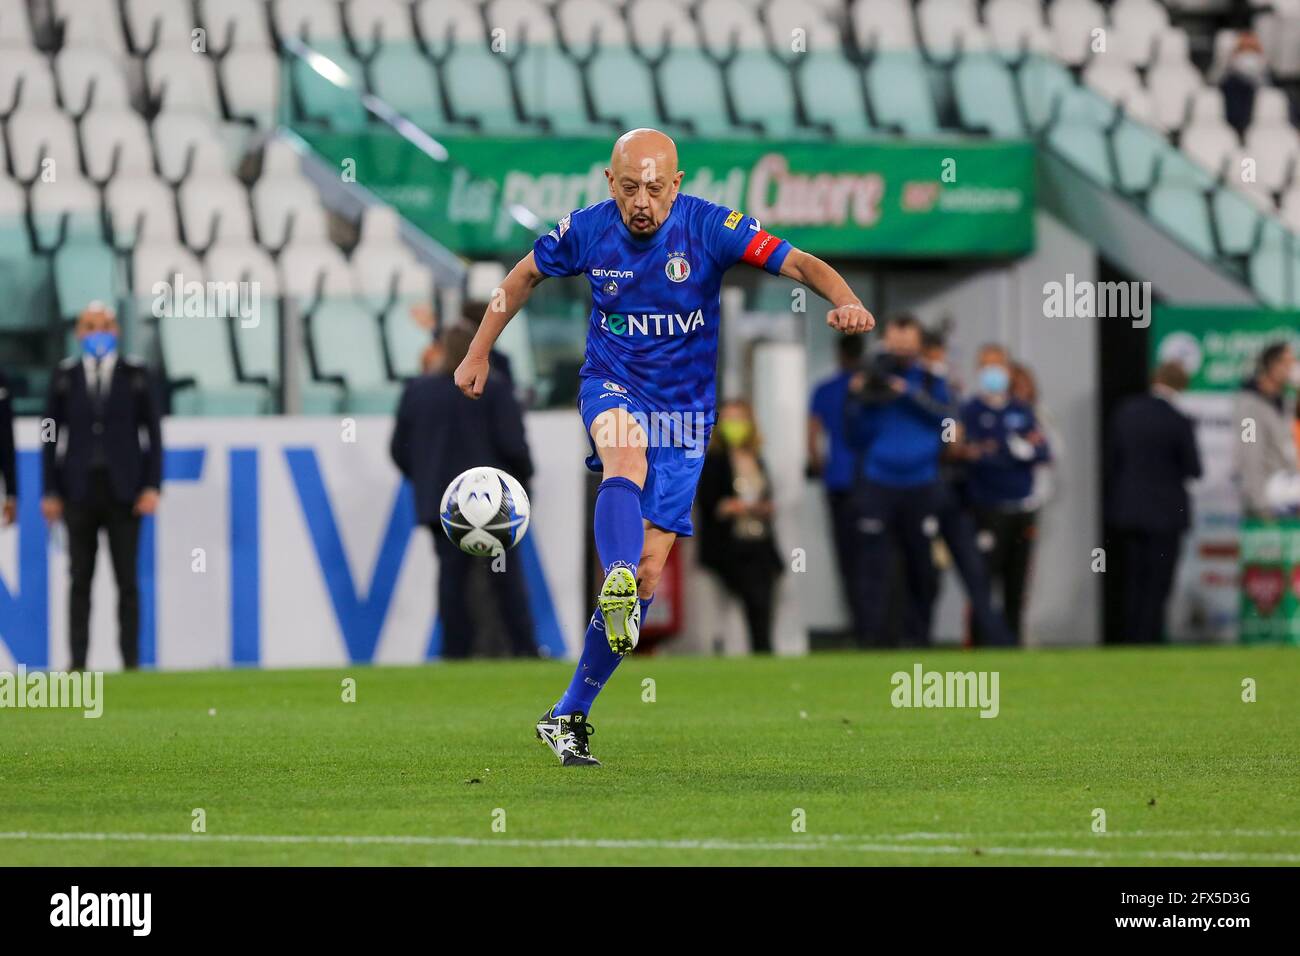 Enrico Ruggeri during the Partita Del Cuore charity football match at Allianz Stadium on May 25, 2021 iin Turin, Italy. Stock Photo